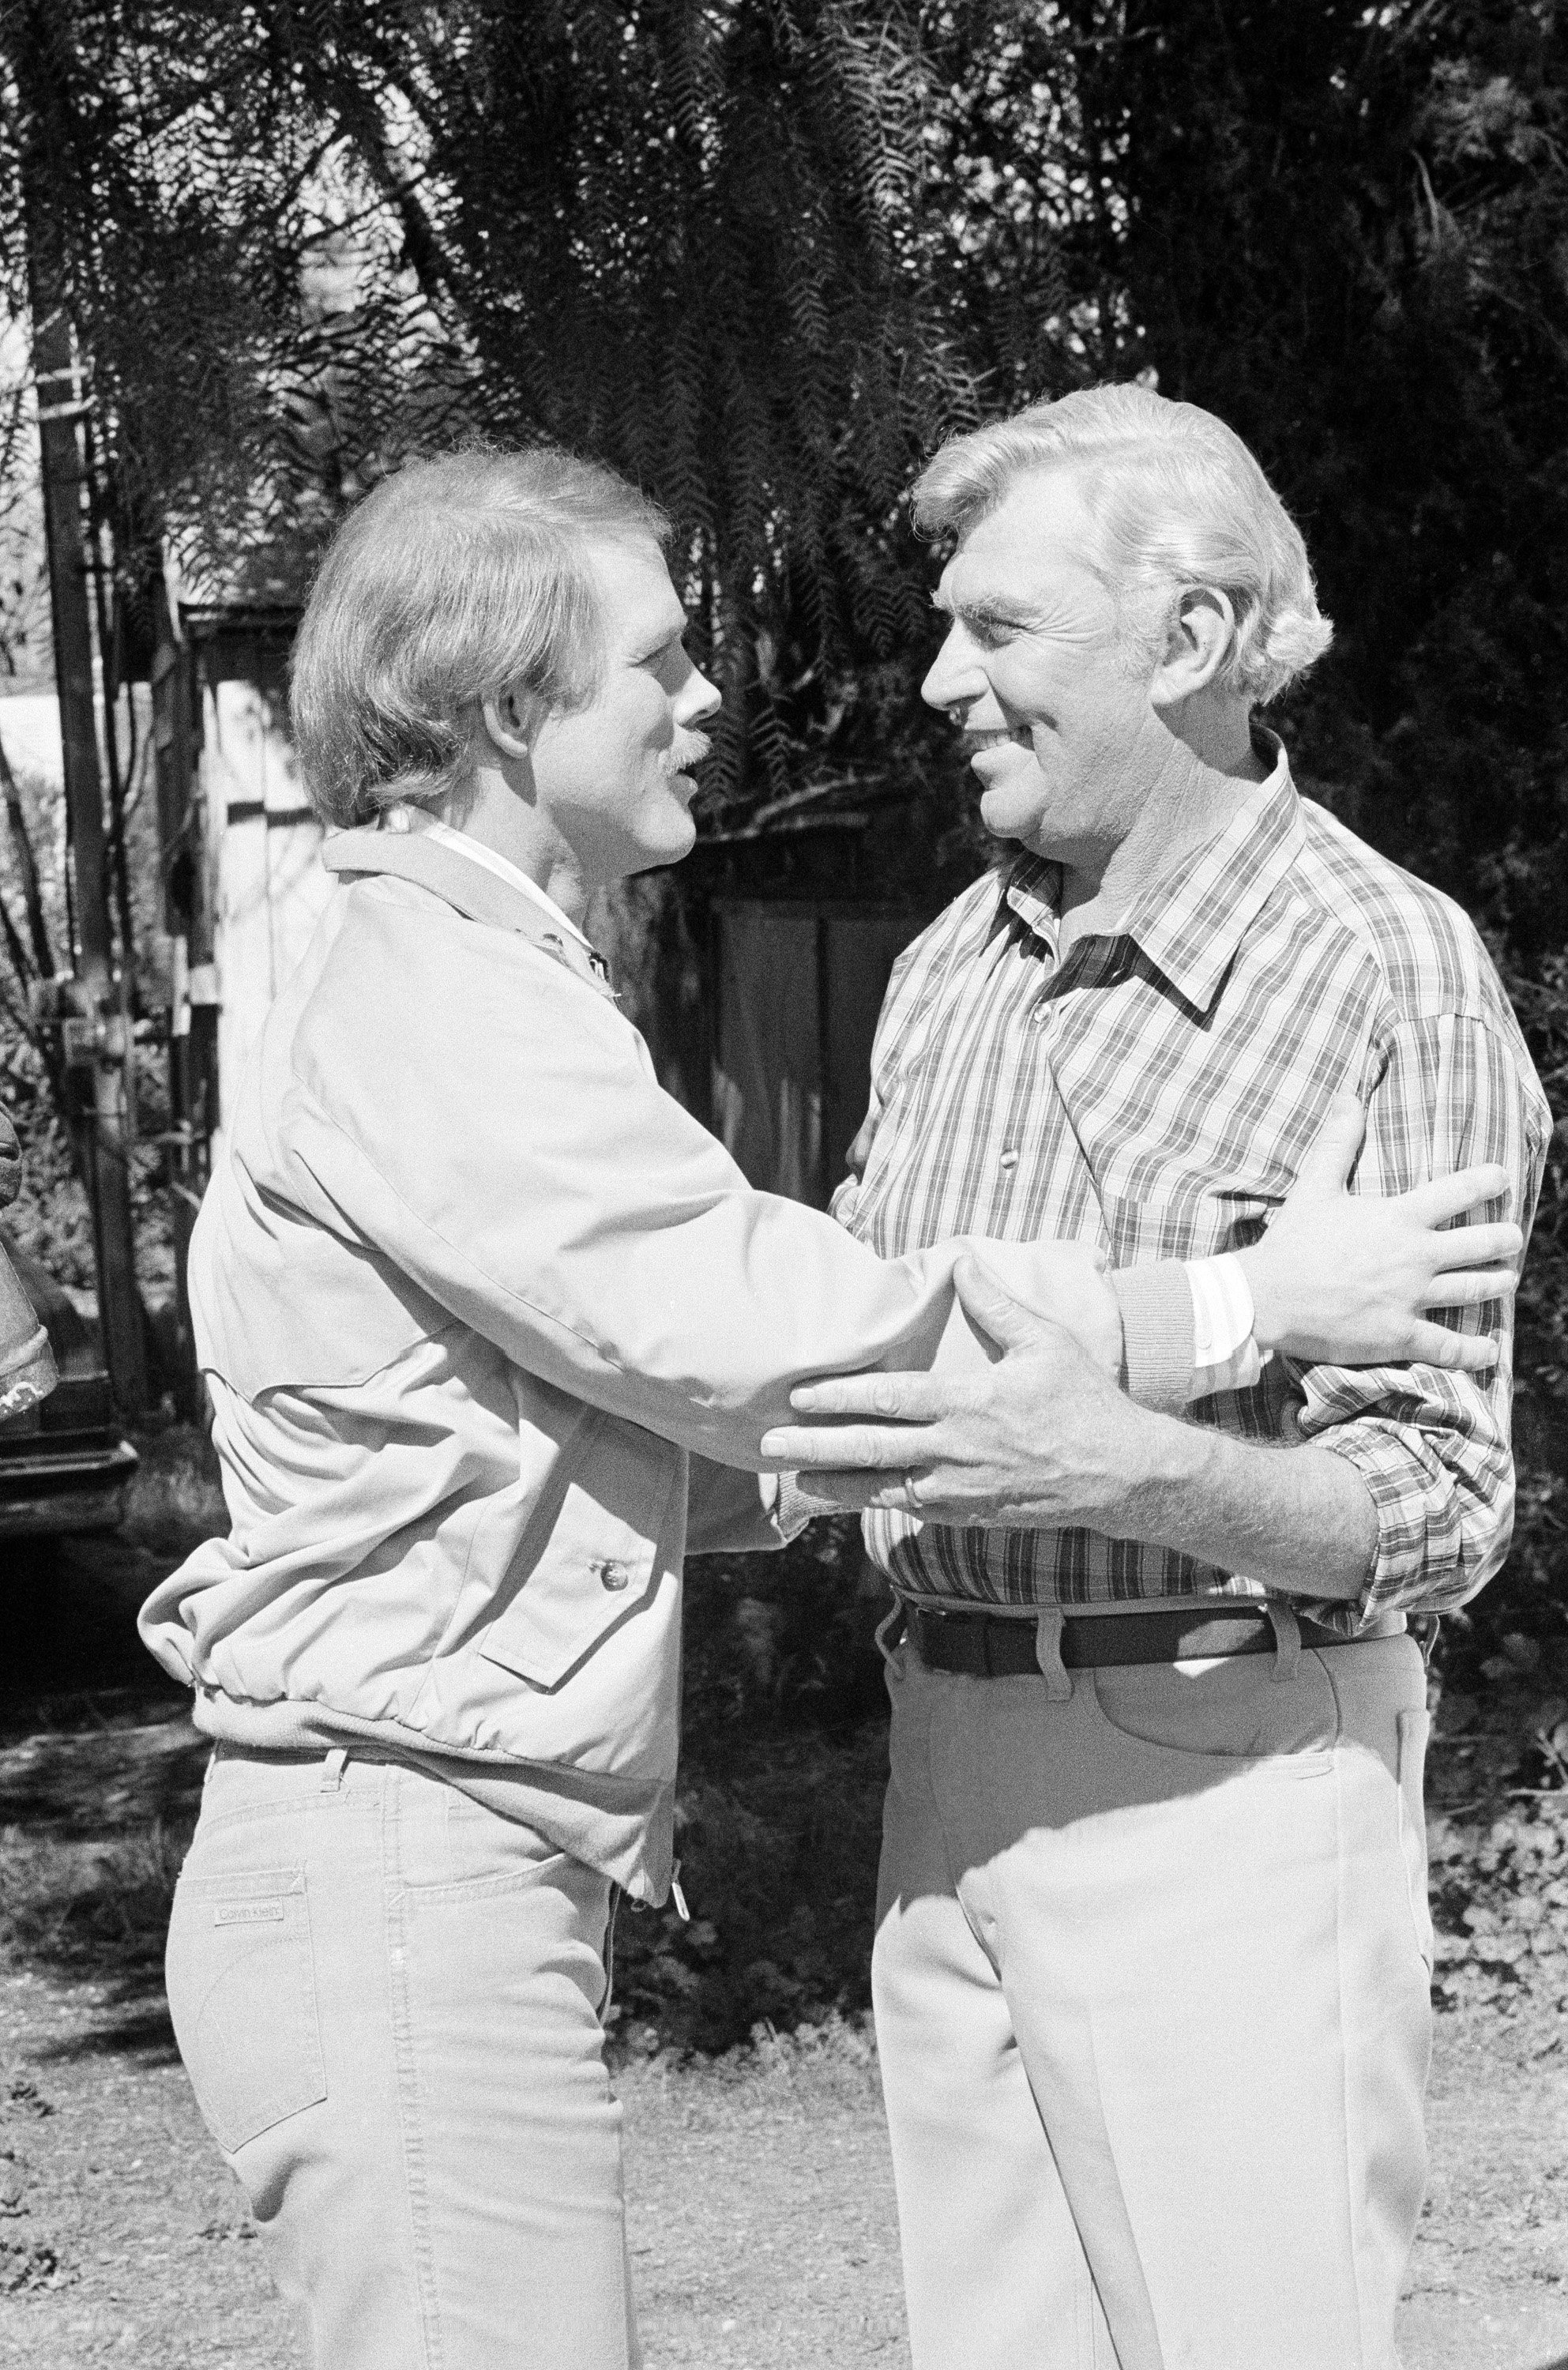 Ron Howard as Opie Taylor and Andy Griffith as Andy Taylor in a scene from the 1986 TV movie 'Return to Mayberry'